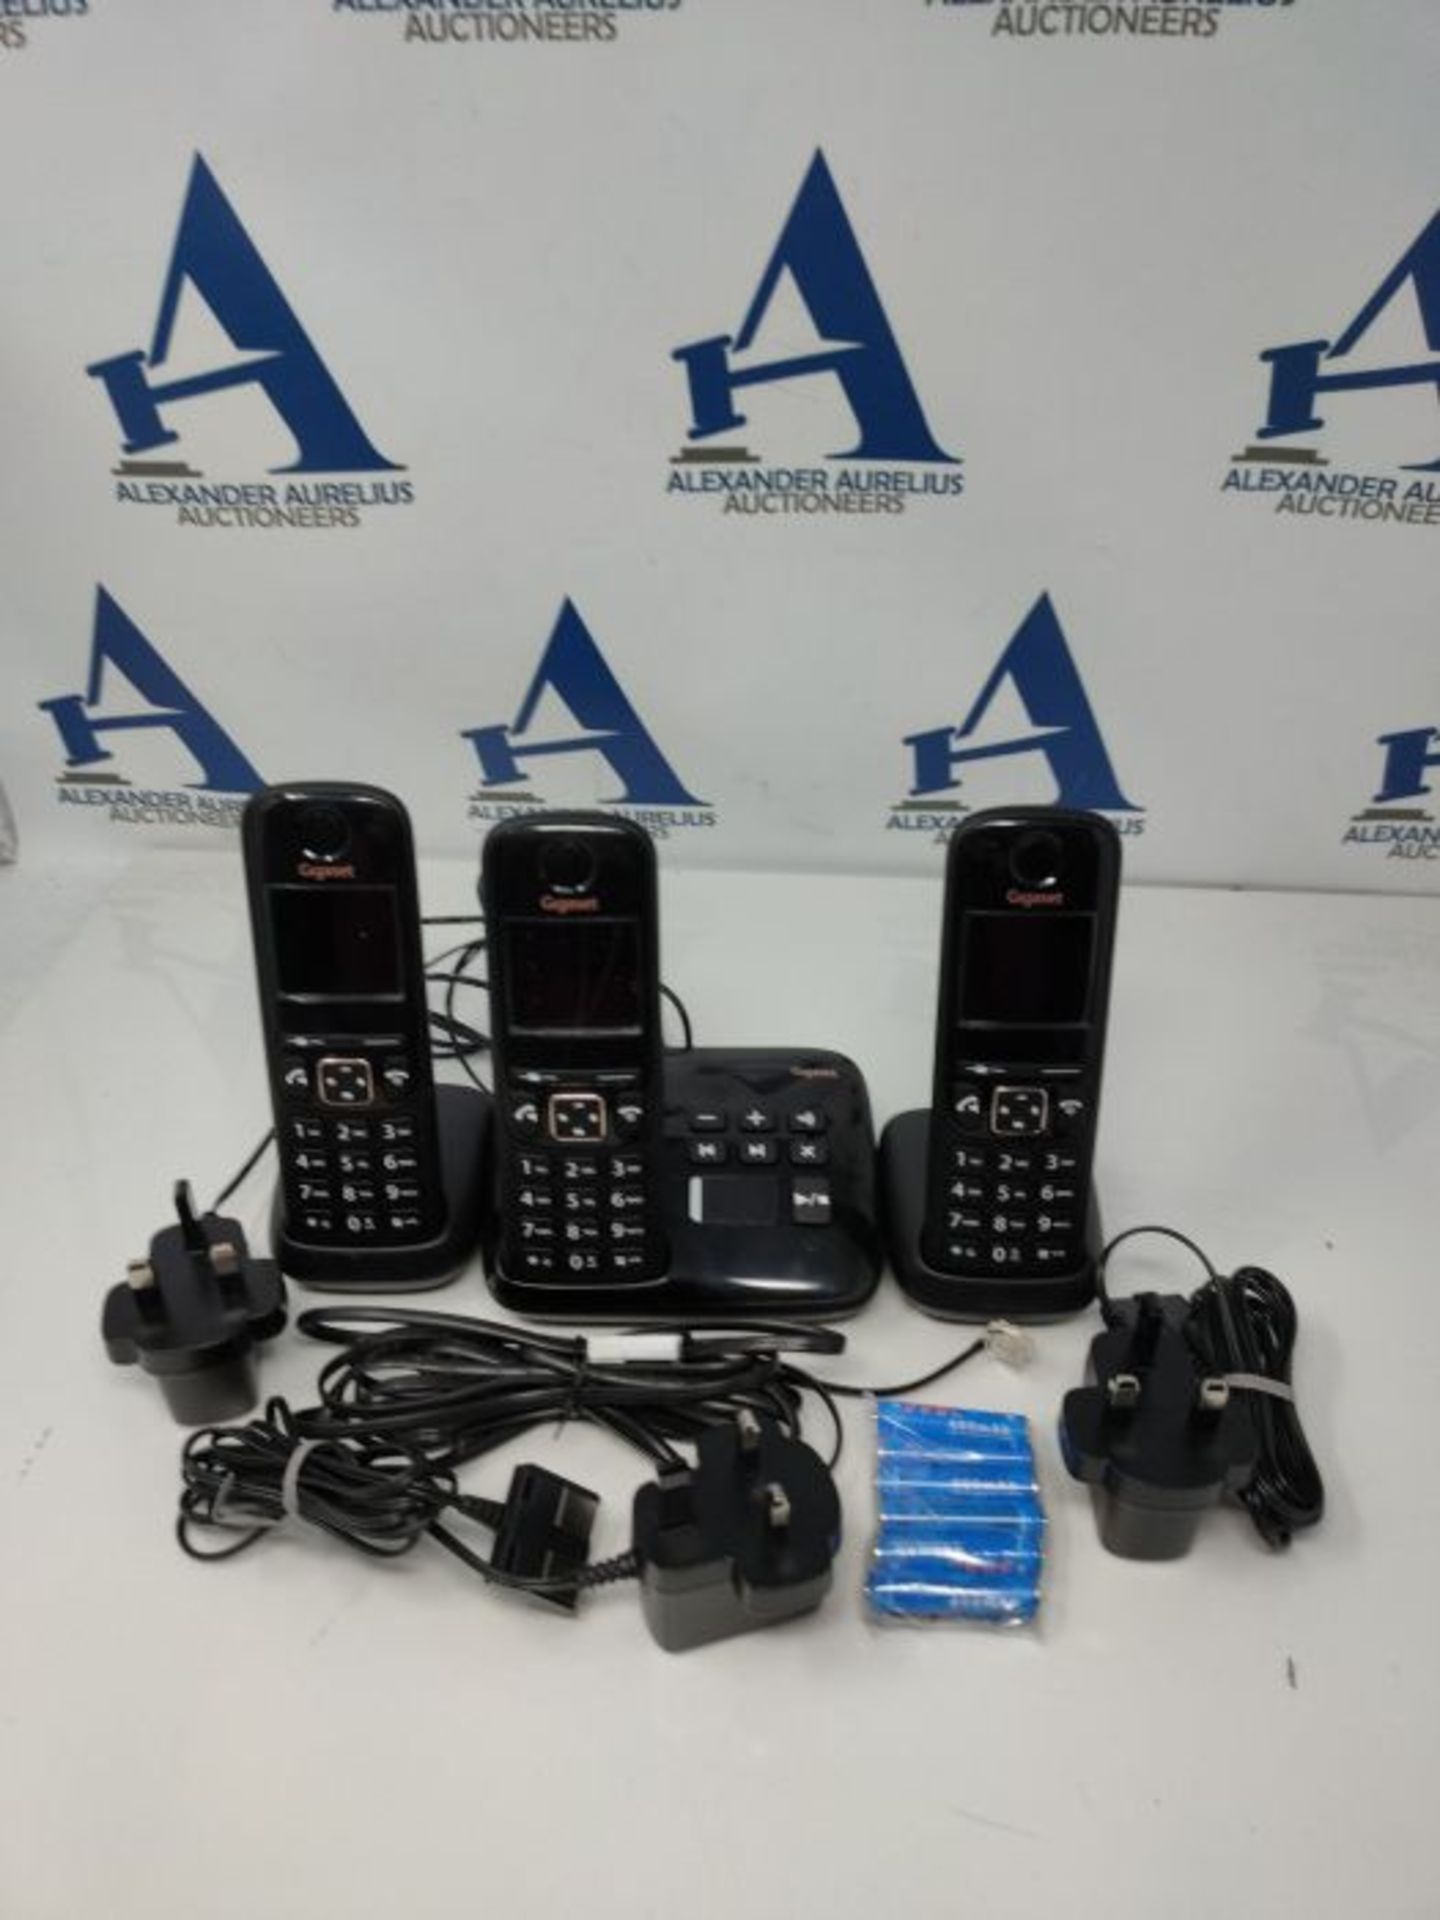 RRP £67.00 Gigaset ALLROUNDER Trio with answer machine - 3 cordless phones - Large, high-contrast